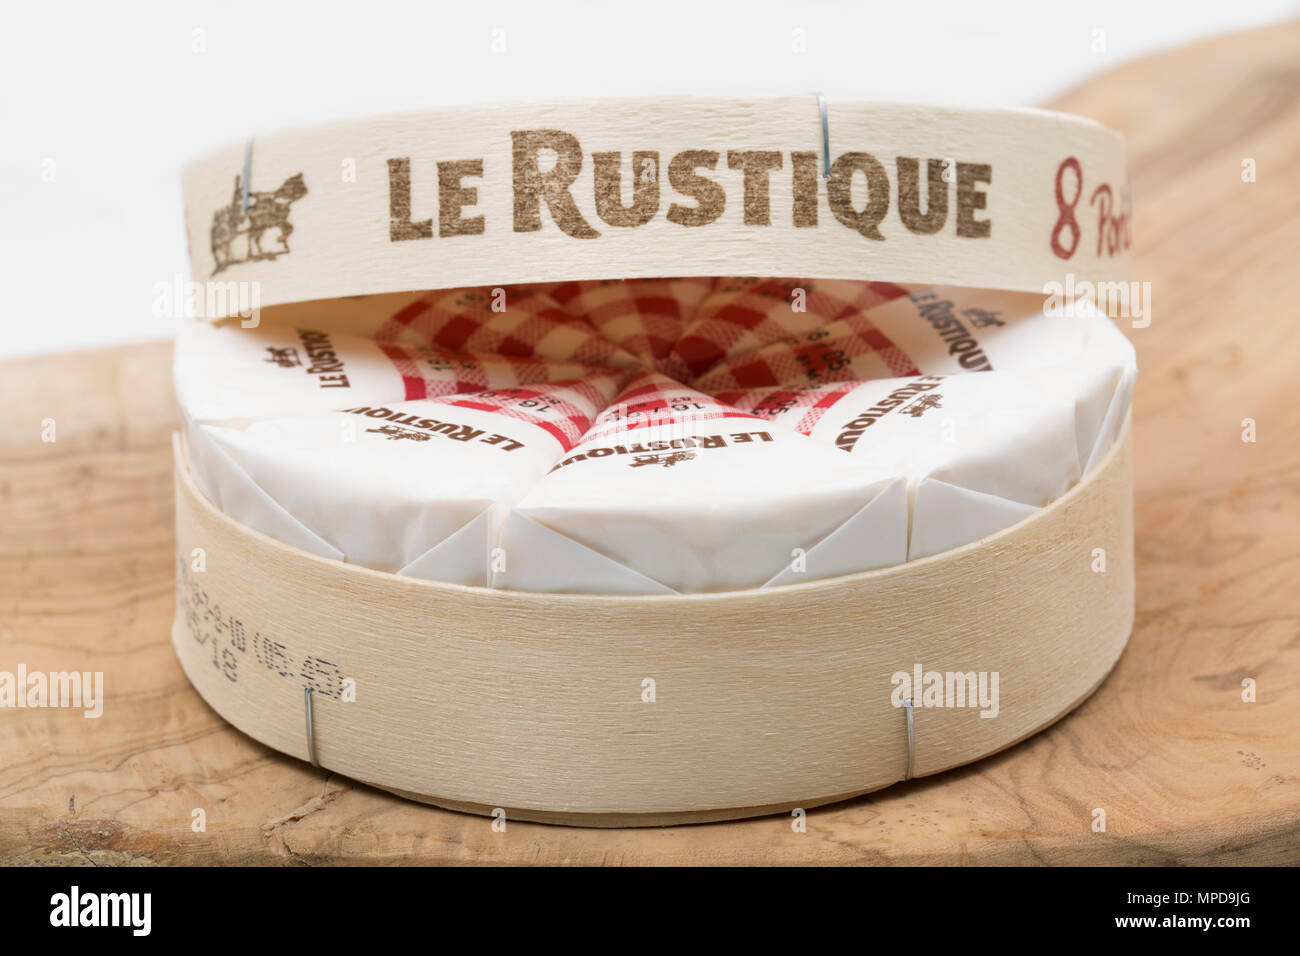 Le Rustique camembert made in Normandy France from cows milk divided into eight individually wrapped camembert wedges. Bought from a supermarket in th Stock Photo